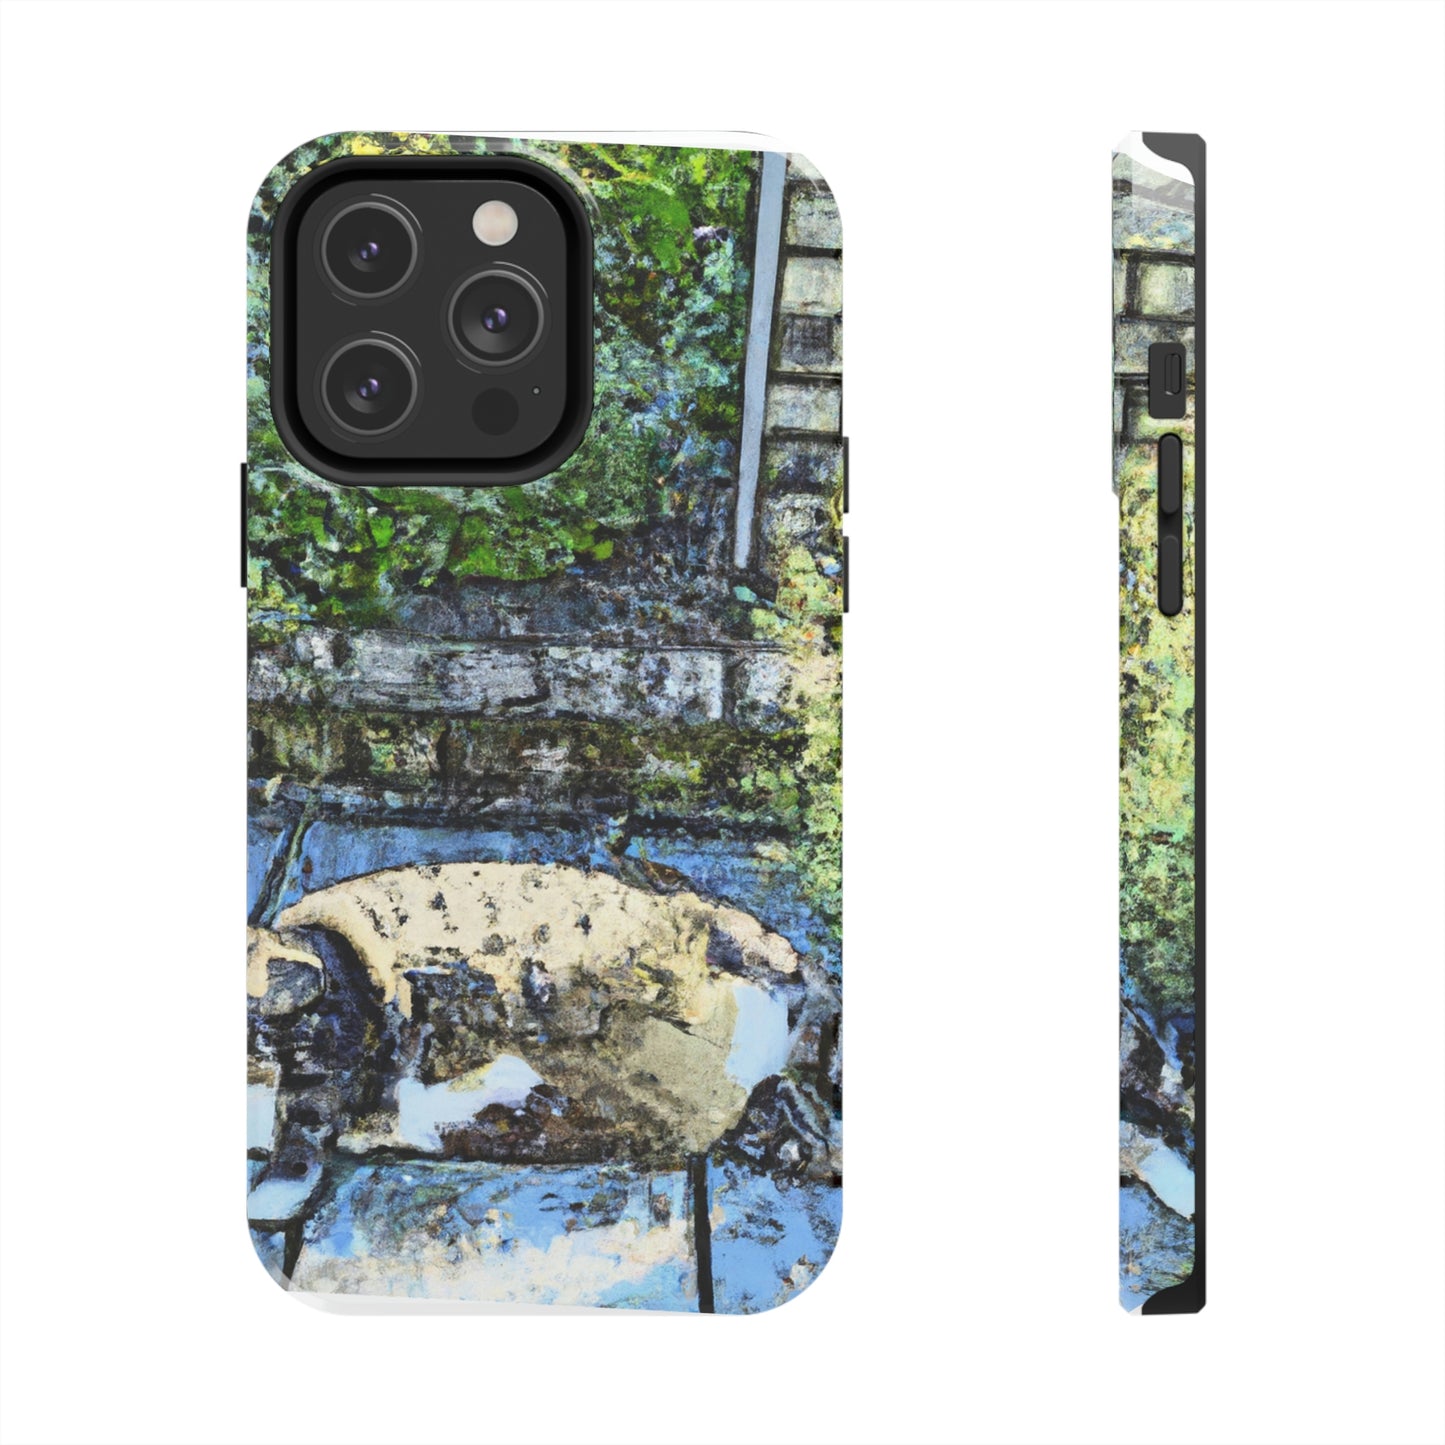 "A Cat's Life of Luxury" - The Alien Tough Phone Cases